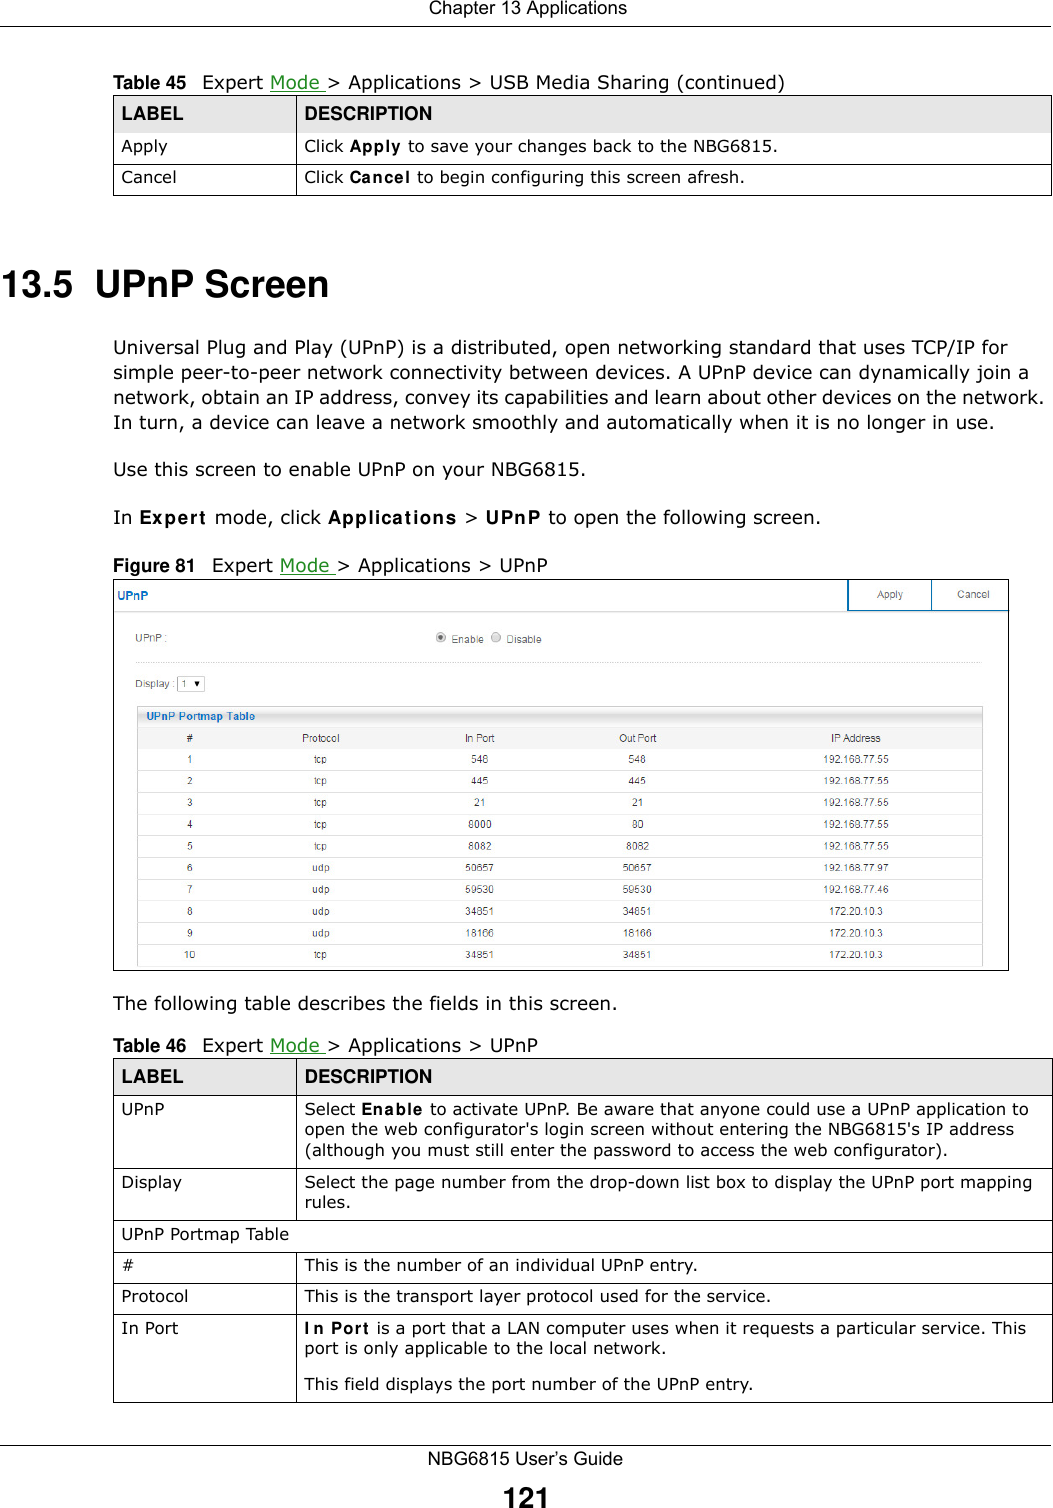  Chapter 13 ApplicationsNBG6815 User’s Guide12113.5  UPnP ScreenUniversal Plug and Play (UPnP) is a distributed, open networking standard that uses TCP/IP for simple peer-to-peer network connectivity between devices. A UPnP device can dynamically join a network, obtain an IP address, convey its capabilities and learn about other devices on the network. In turn, a device can leave a network smoothly and automatically when it is no longer in use.Use this screen to enable UPnP on your NBG6815.In Expert mode, click Applications &gt; UPnP to open the following screen. Figure 81   Expert Mode &gt; Applications &gt; UPnPThe following table describes the fields in this screen.Apply Click Apply to save your changes back to the NBG6815.Cancel Click Cancel to begin configuring this screen afresh.Table 45   Expert Mode &gt; Applications &gt; USB Media Sharing (continued)LABEL DESCRIPTIONTable 46   Expert Mode &gt; Applications &gt; UPnPLABEL DESCRIPTIONUPnP Select Enable to activate UPnP. Be aware that anyone could use a UPnP application to open the web configurator&apos;s login screen without entering the NBG6815&apos;s IP address (although you must still enter the password to access the web configurator).Display Select the page number from the drop-down list box to display the UPnP port mapping rules.UPnP Portmap Table#This is the number of an individual UPnP entry.Protocol This is the transport layer protocol used for the service.In Port In Port is a port that a LAN computer uses when it requests a particular service. This port is only applicable to the local network. This field displays the port number of the UPnP entry.